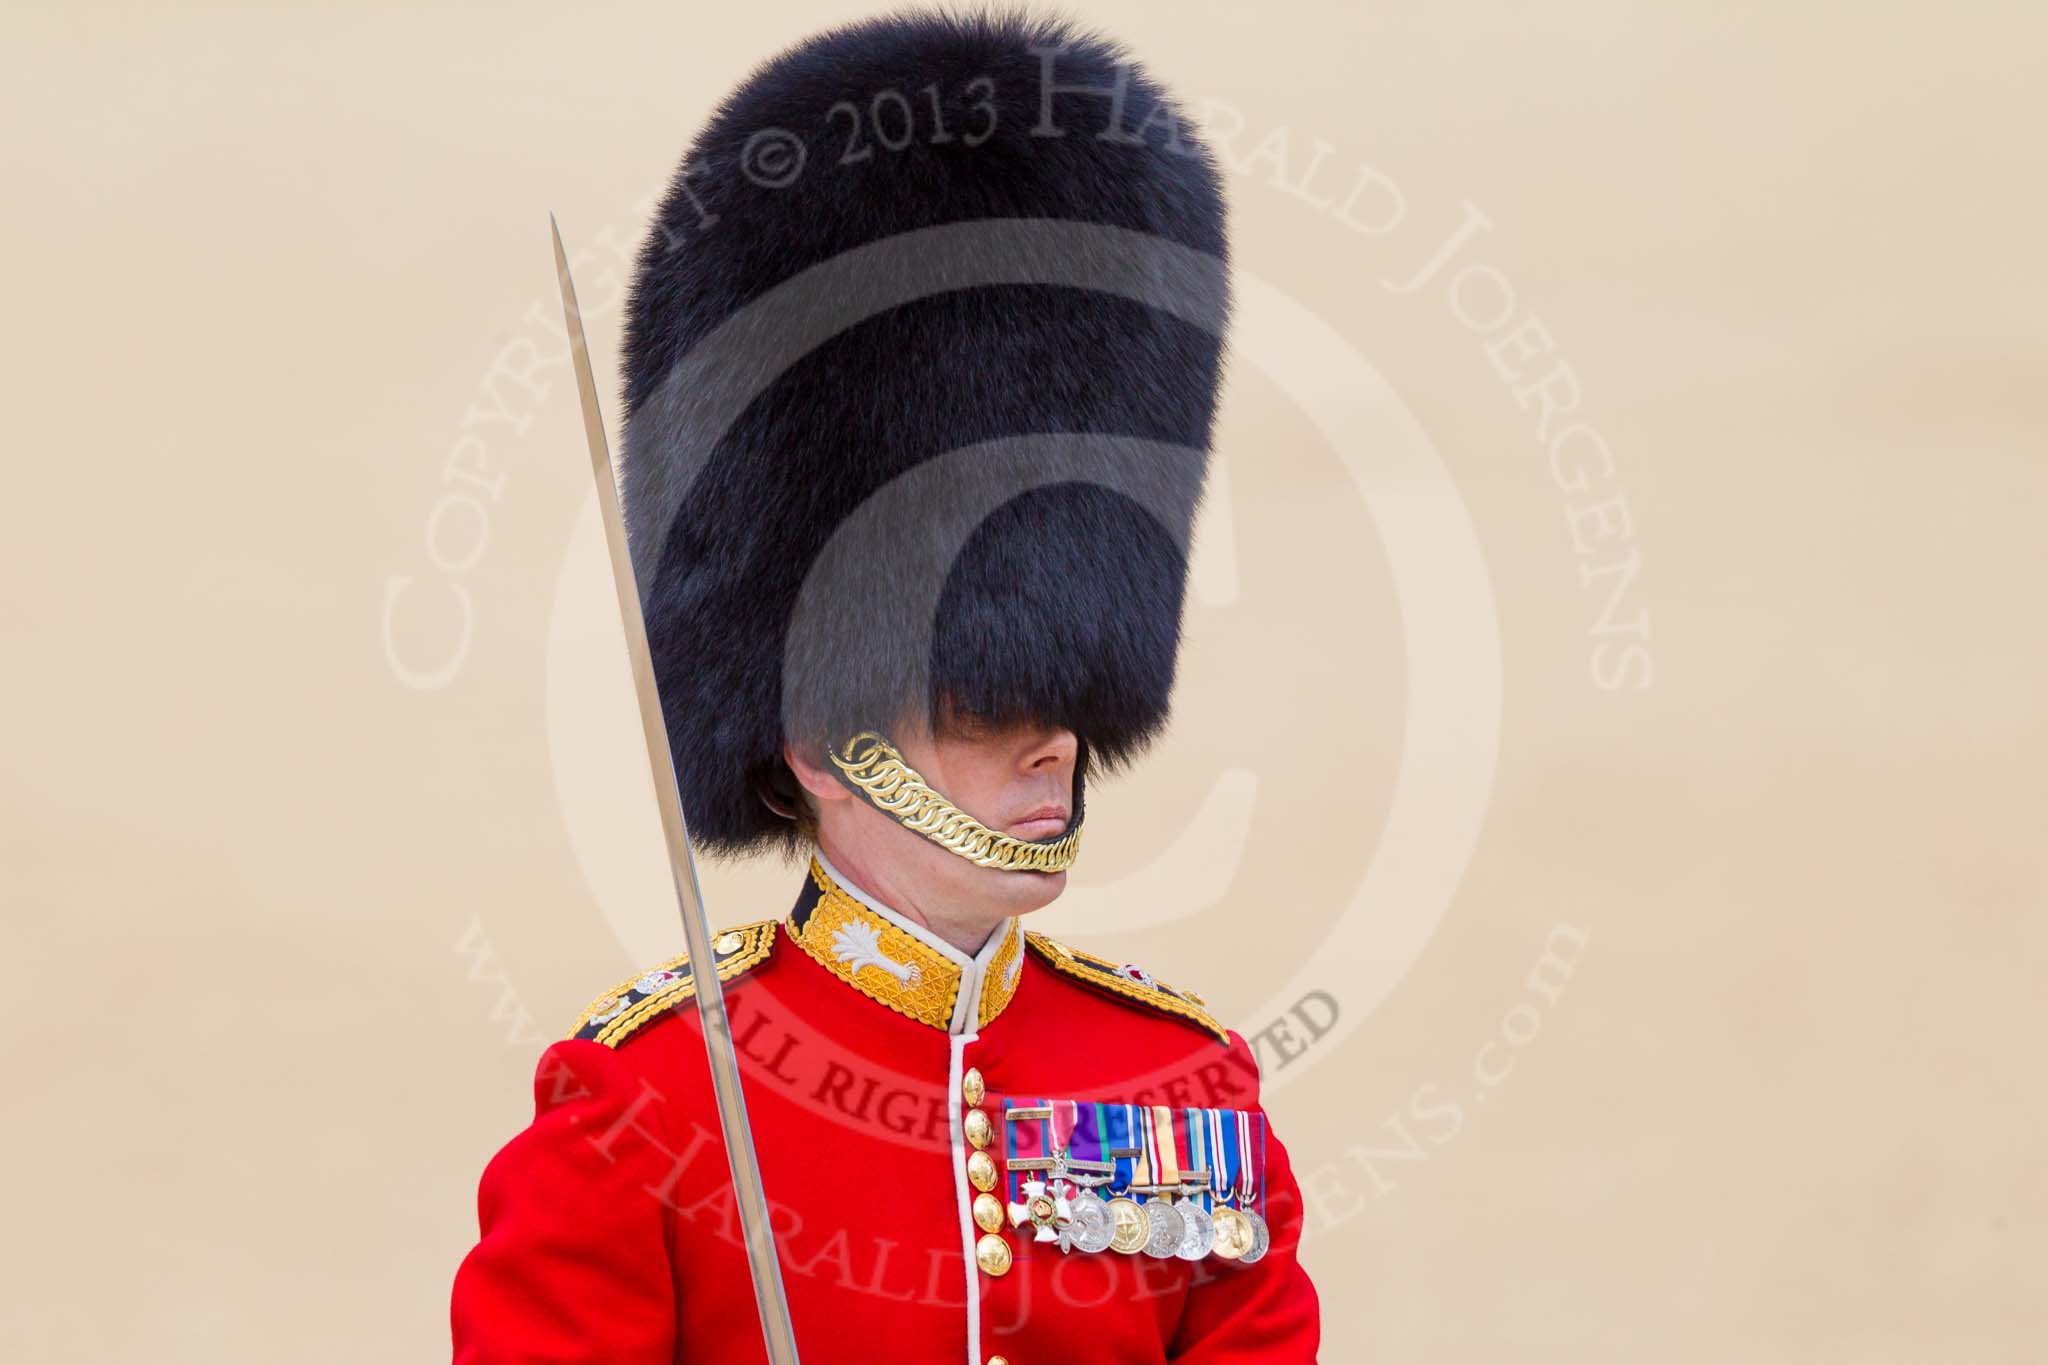 The Colonel's Review 2015.
Horse Guards Parade, Westminster,
London,

United Kingdom,
on 06 June 2015 at 11:38, image #405